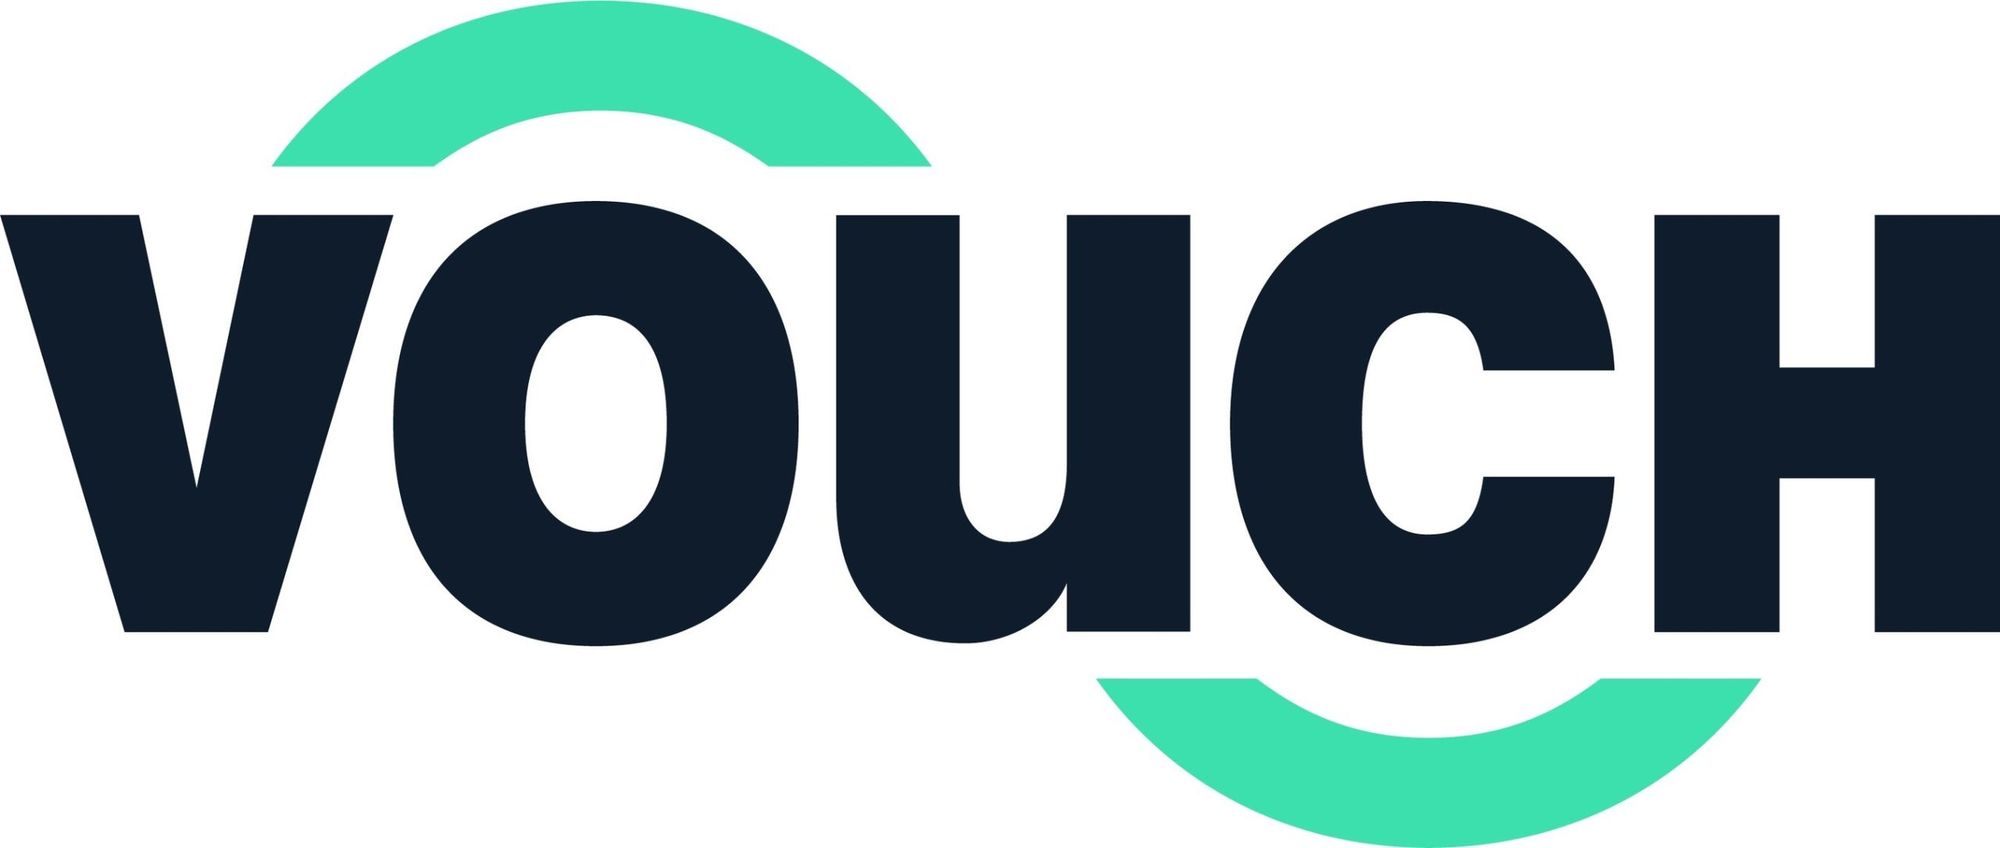 Vouch Secures $25 Million in Series C-1 Investment Round